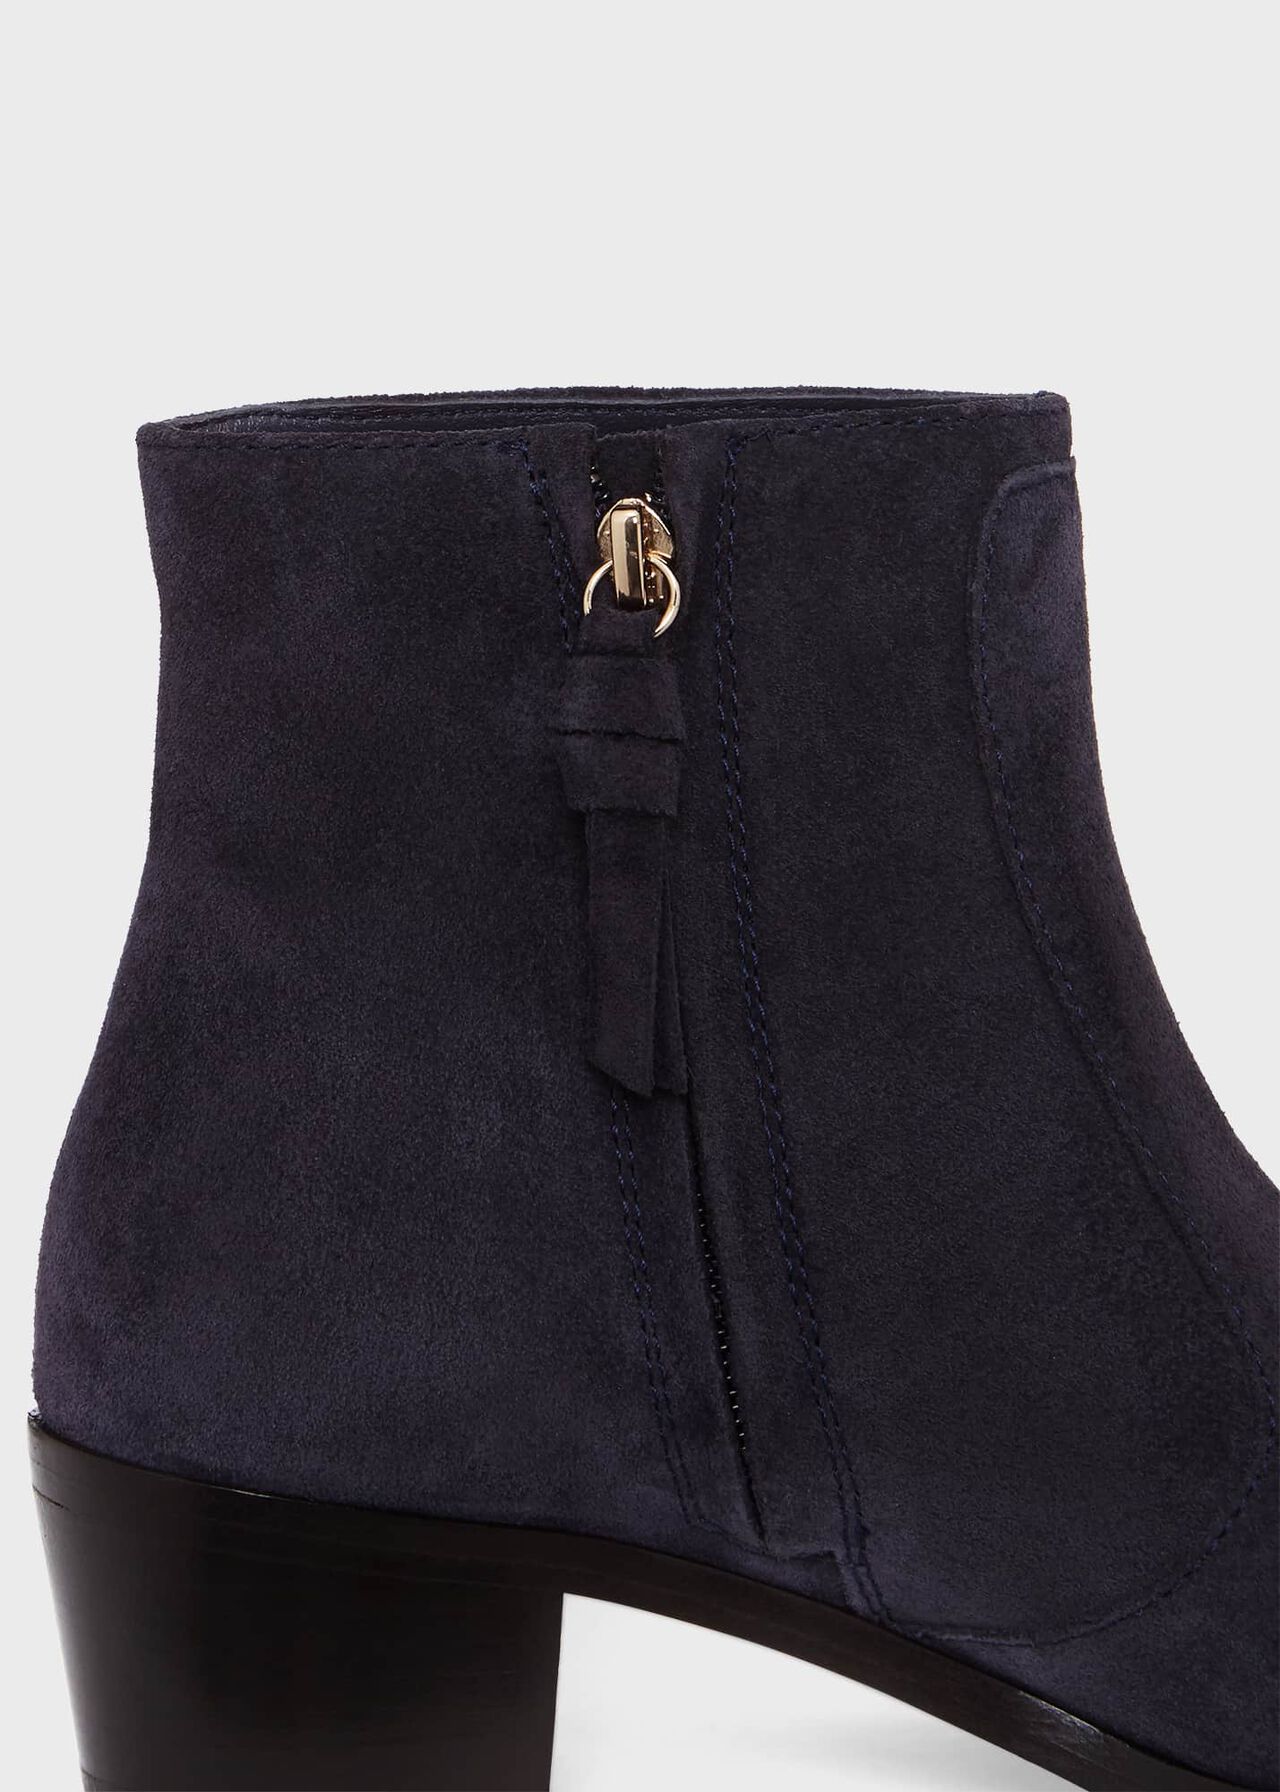 Shona Ankle Boots, Navy, hi-res